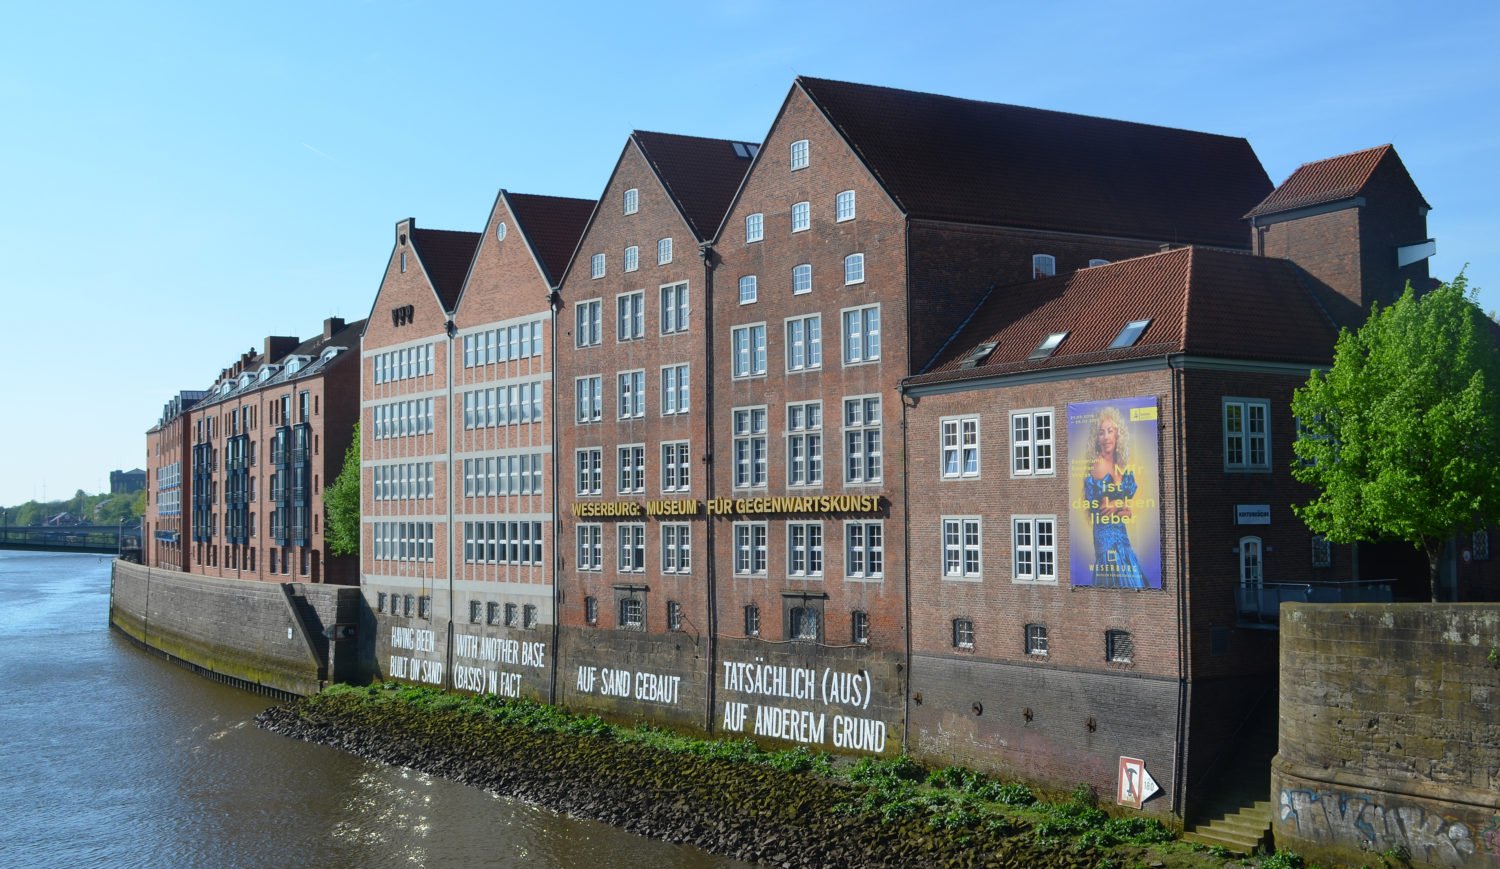 The Weserburg, Bremen's museum for contemporary art, is located in four former warehouse buildings on Bremen's Stadtwerder